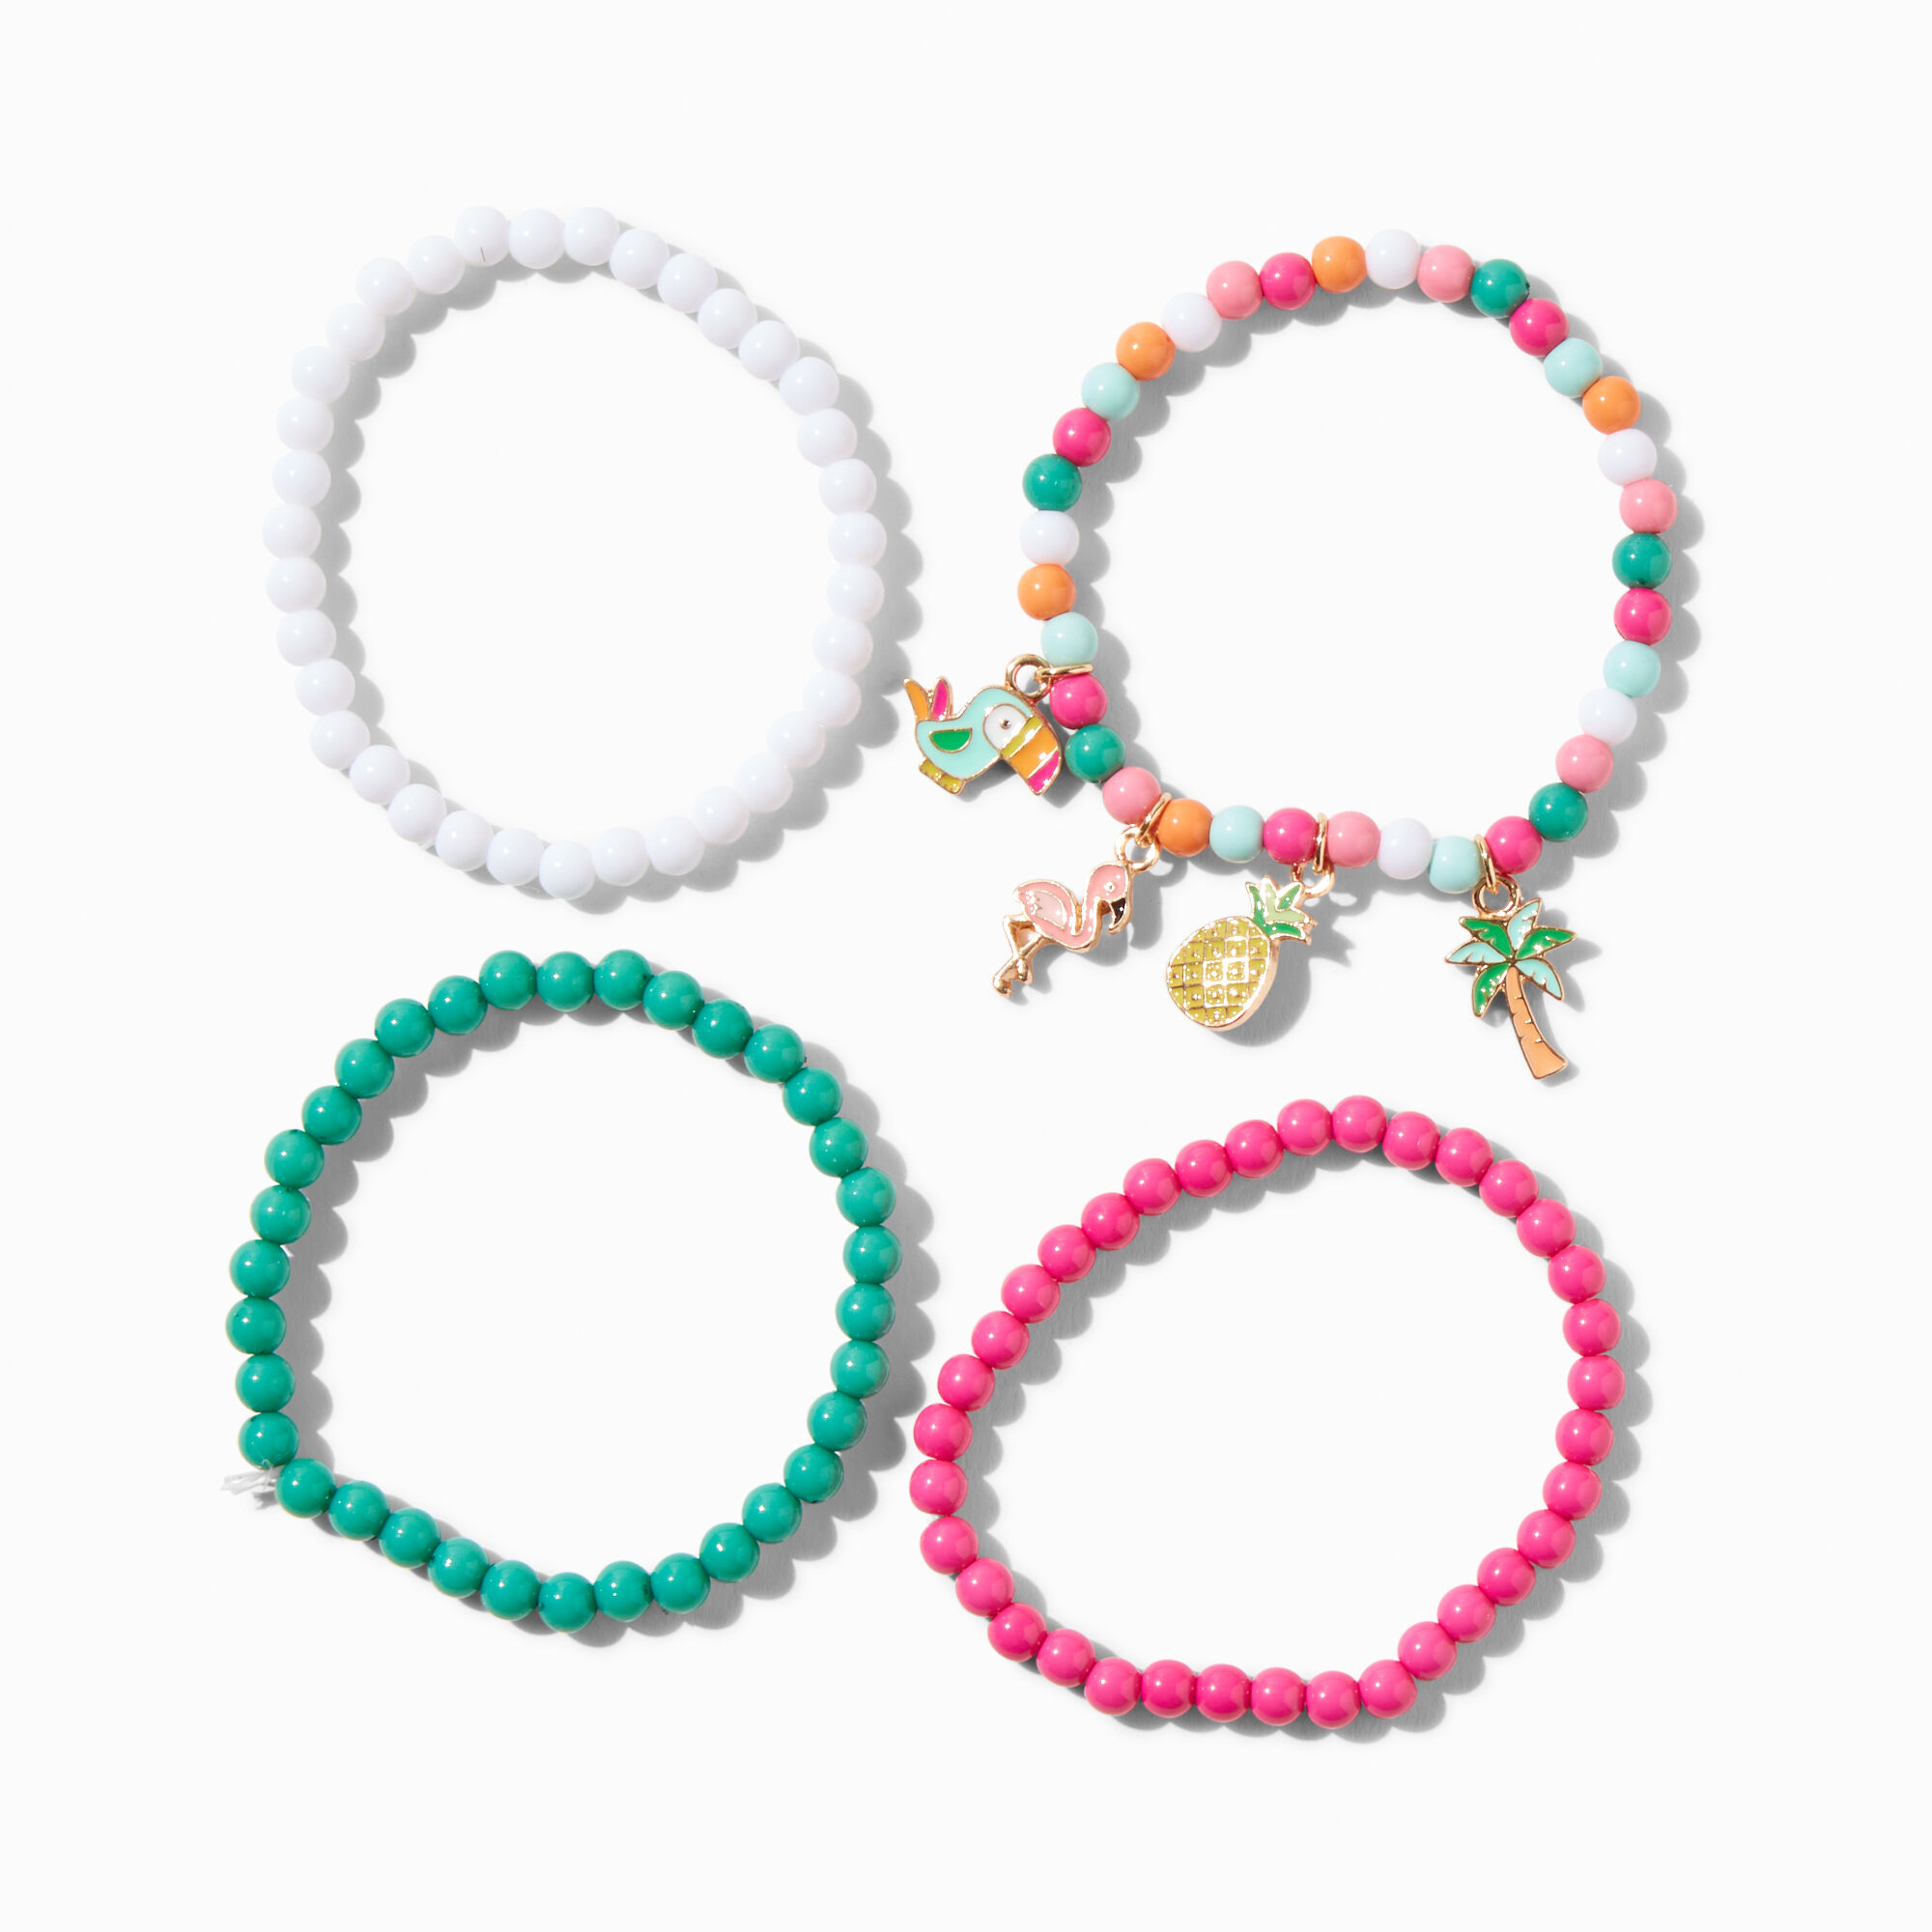 View Claires Club Vacation Seed Bead Stretch Bracelets 4 Pack information